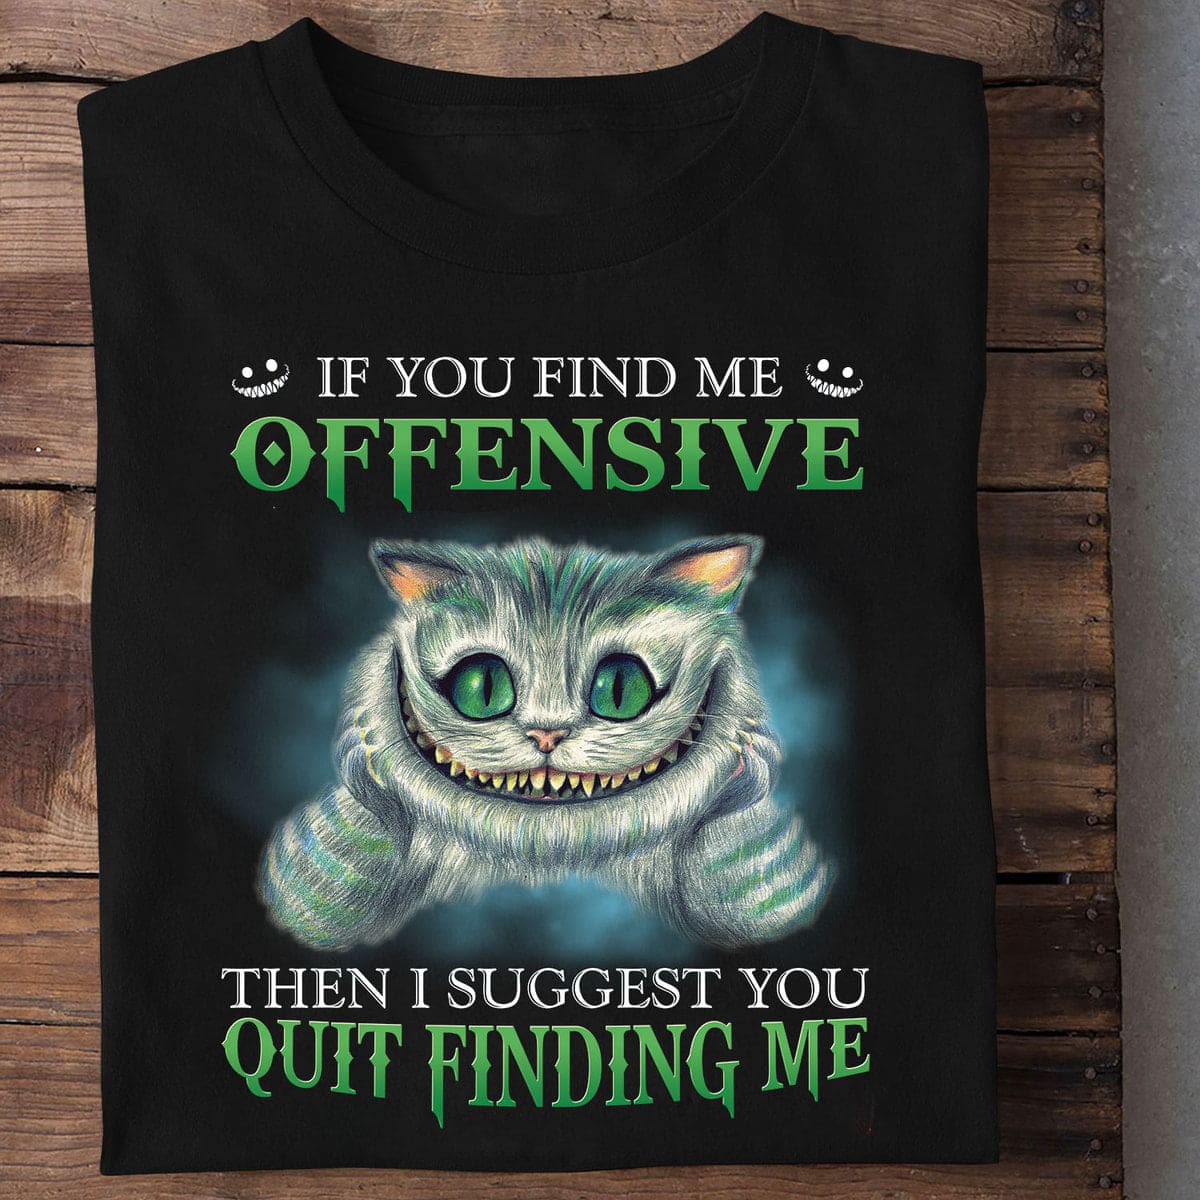 If you find me offensive then I suggest you quit finding me - Chesire cat graphic T-shirt